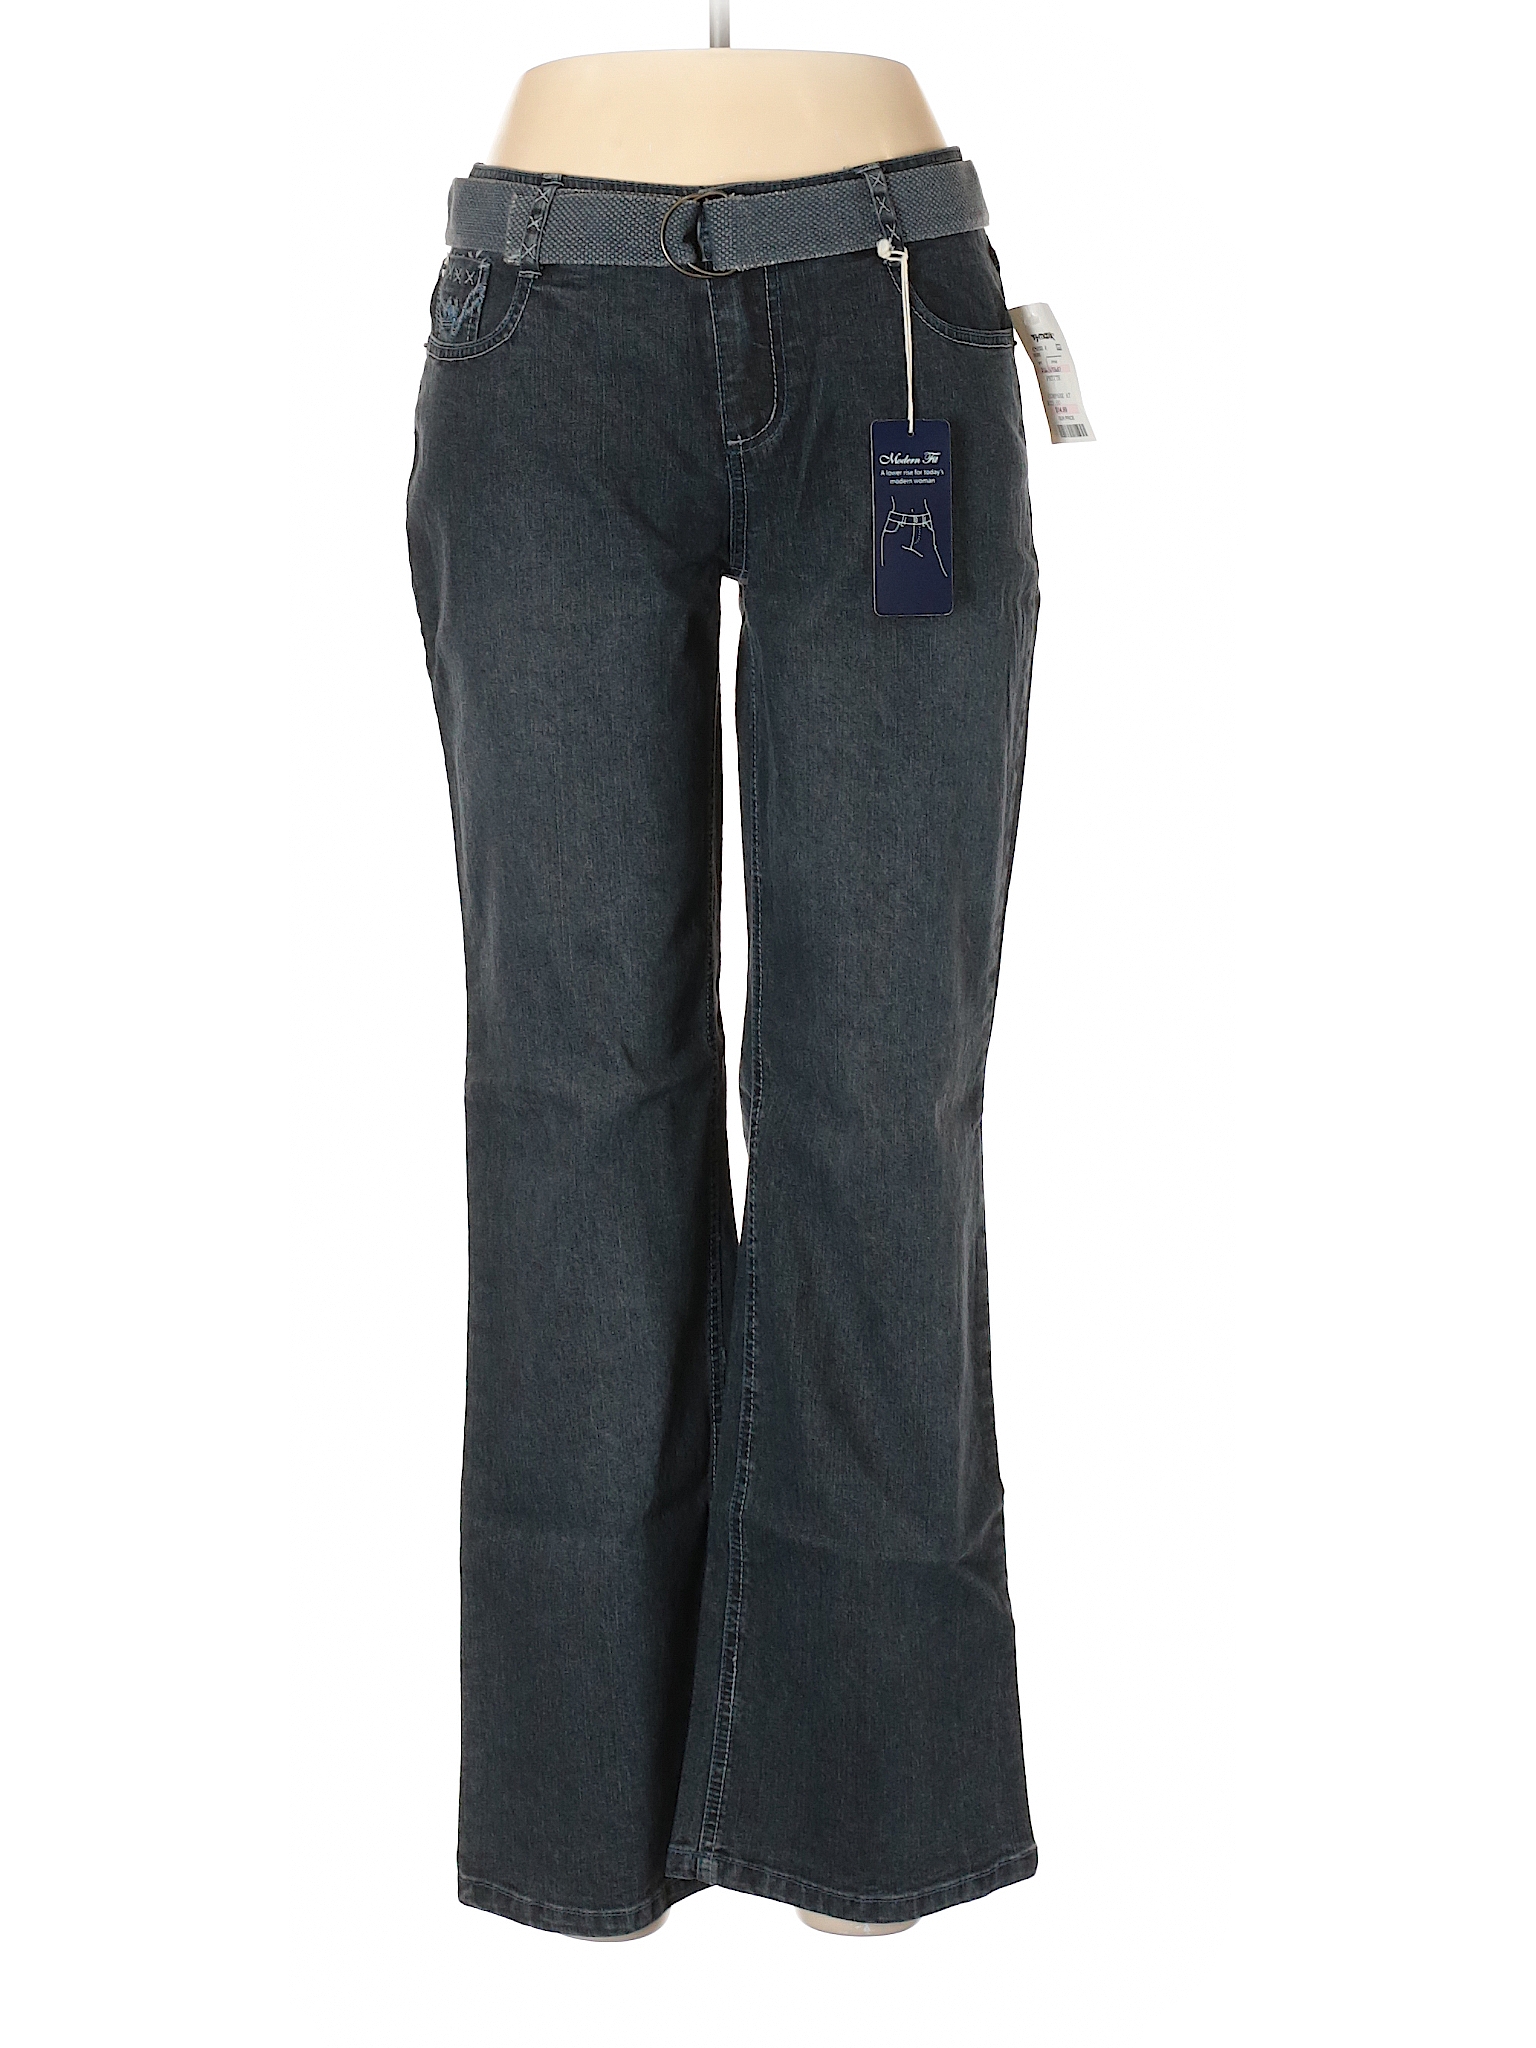 Duplex by Tyte Solid Blue Jeans Size 8 (Petite) - 62% off | thredUP